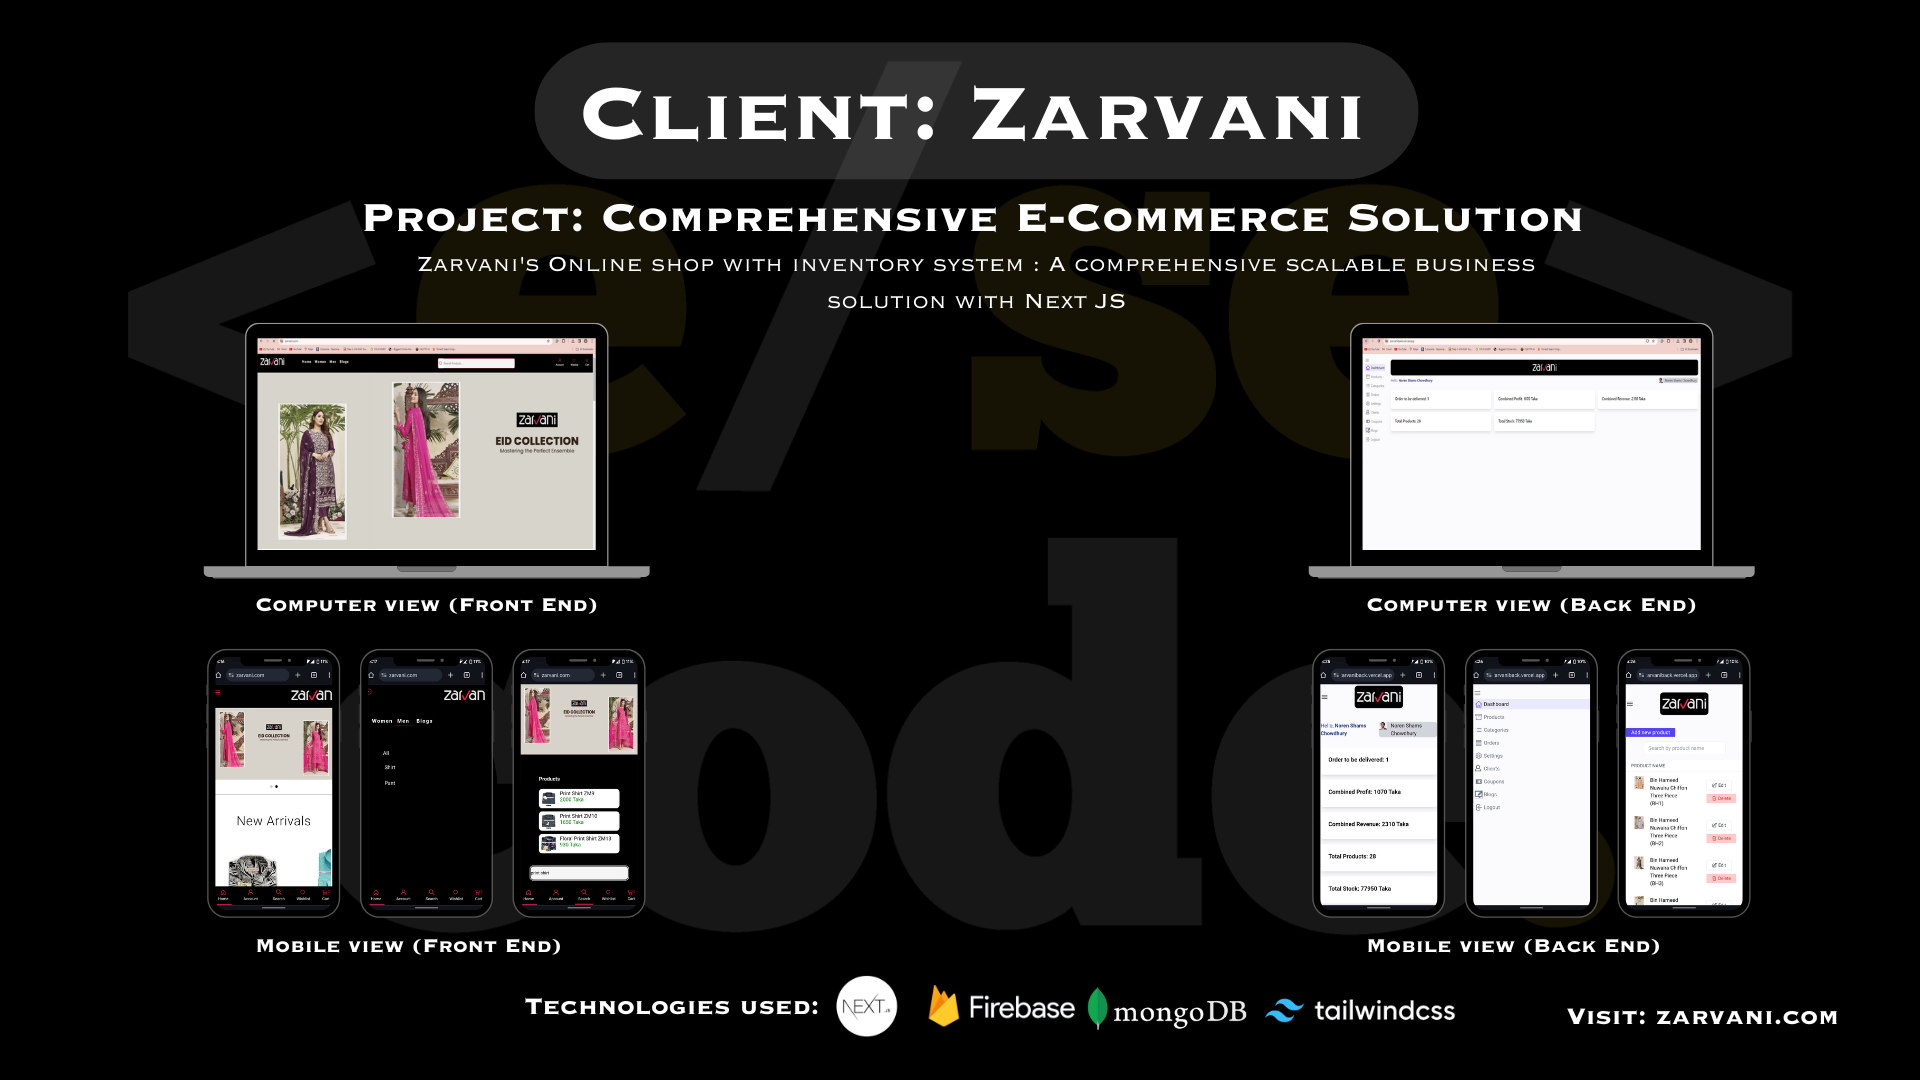 ZARVANI's Online shop with inventory system : A comprehensive scalable business solution with Next JS